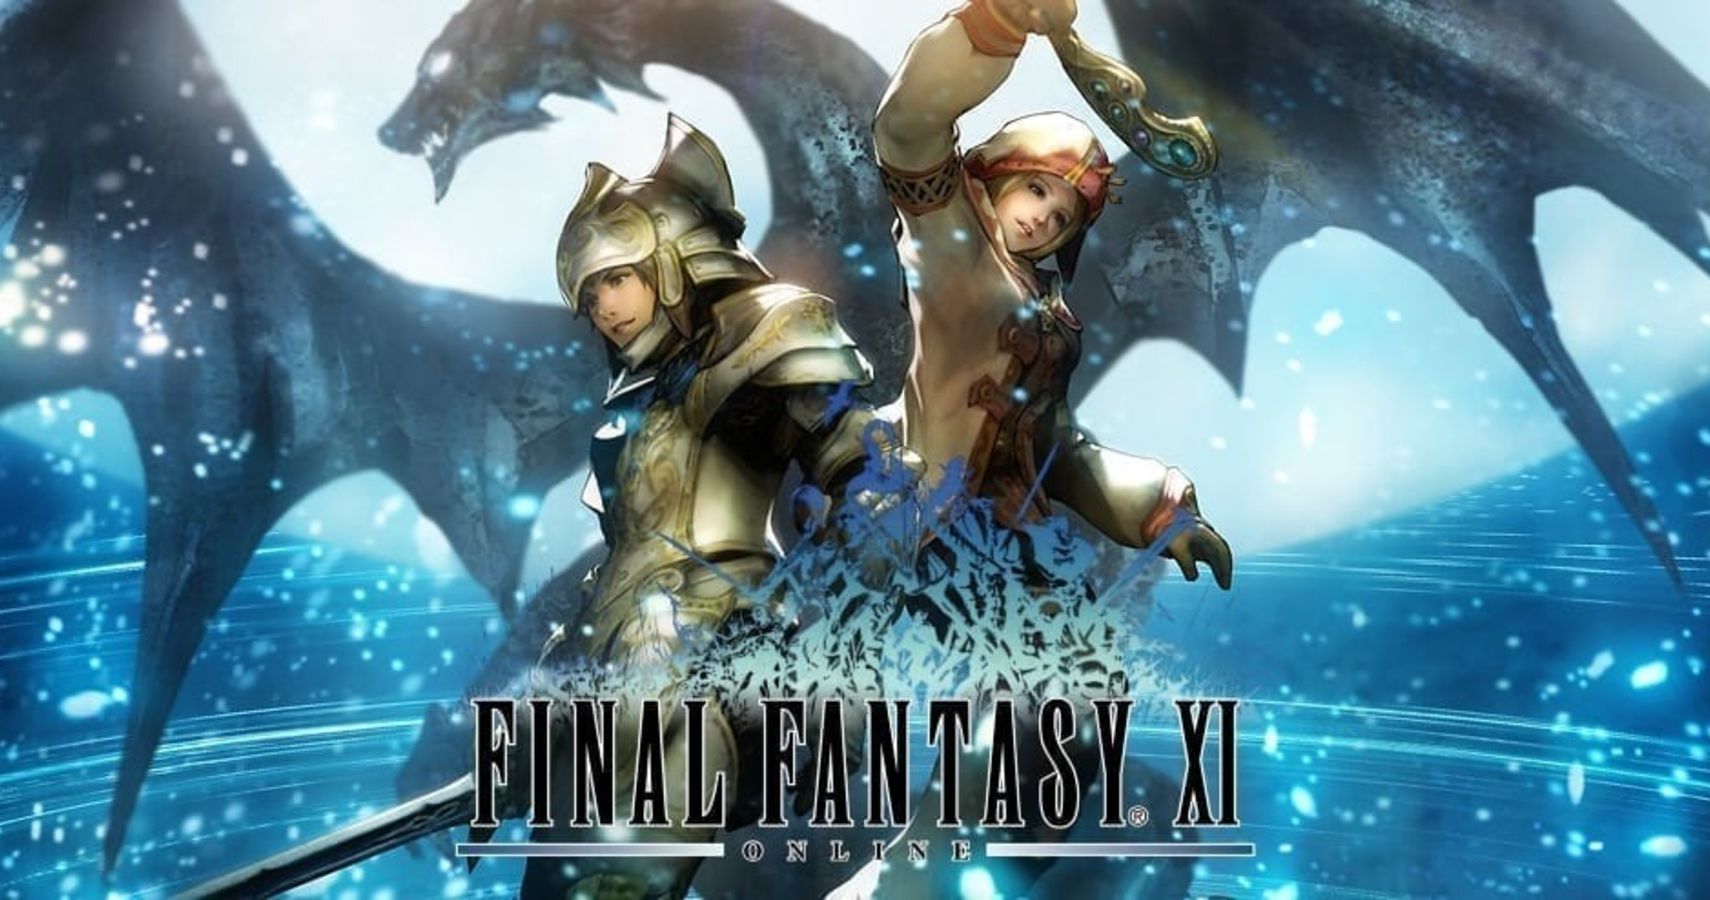 I’m Devastated Over That Final Fantasy 11 Mobile Reboot Cancellation